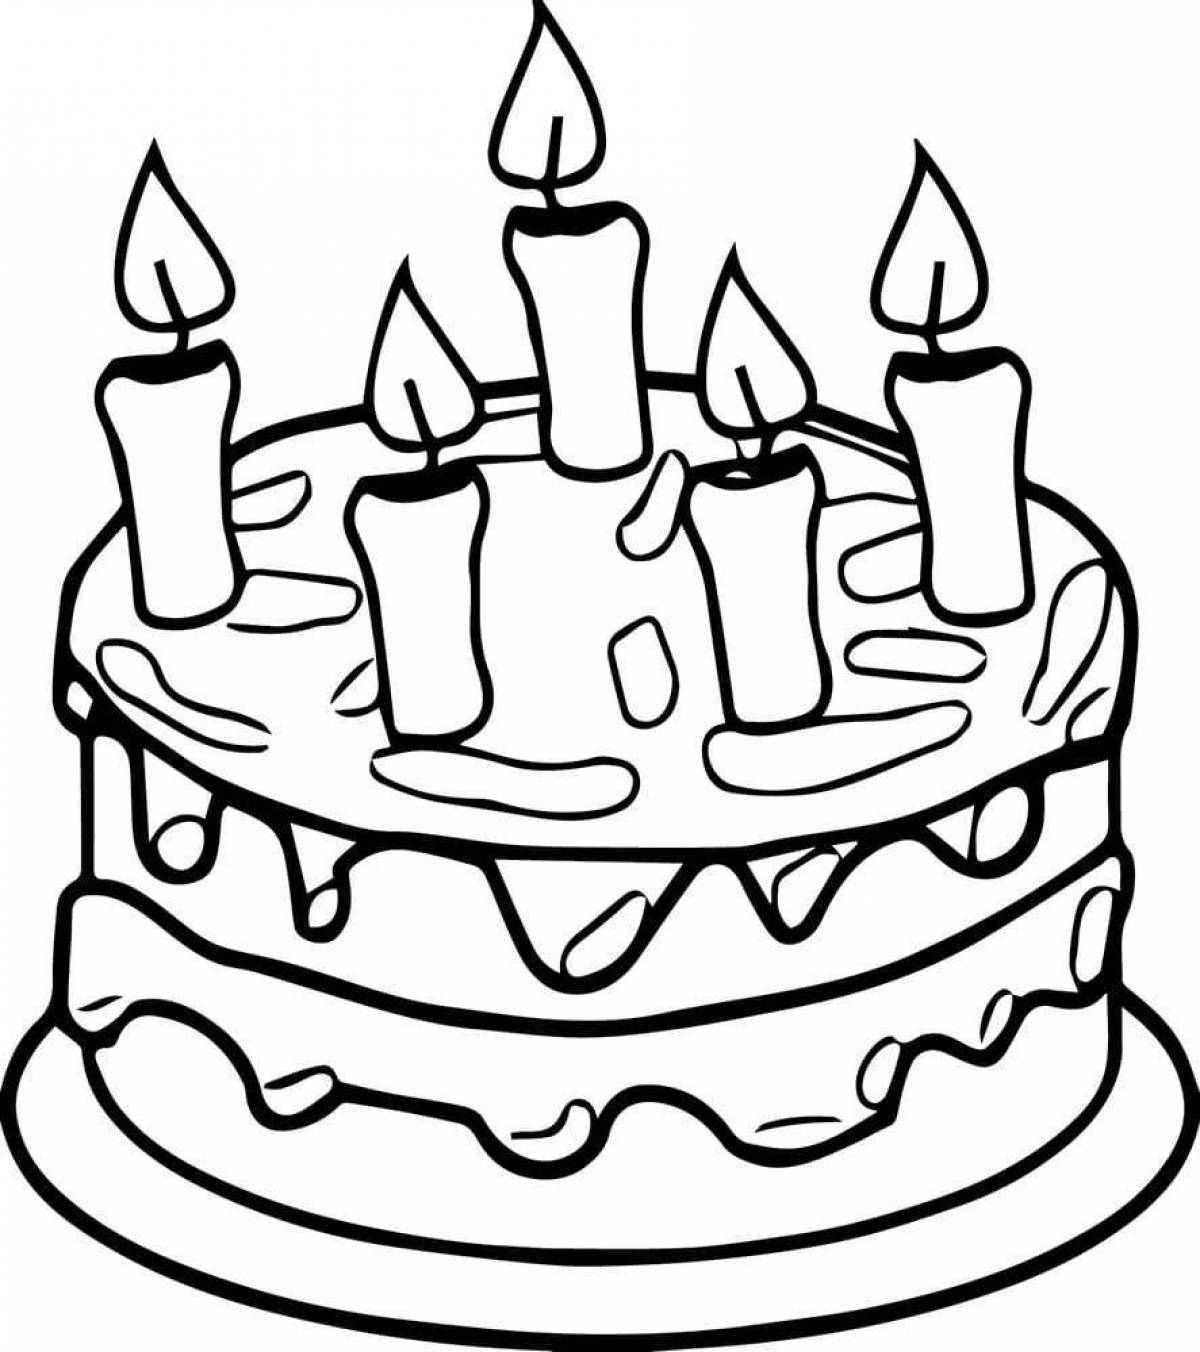 Coloring page funny birthday cake